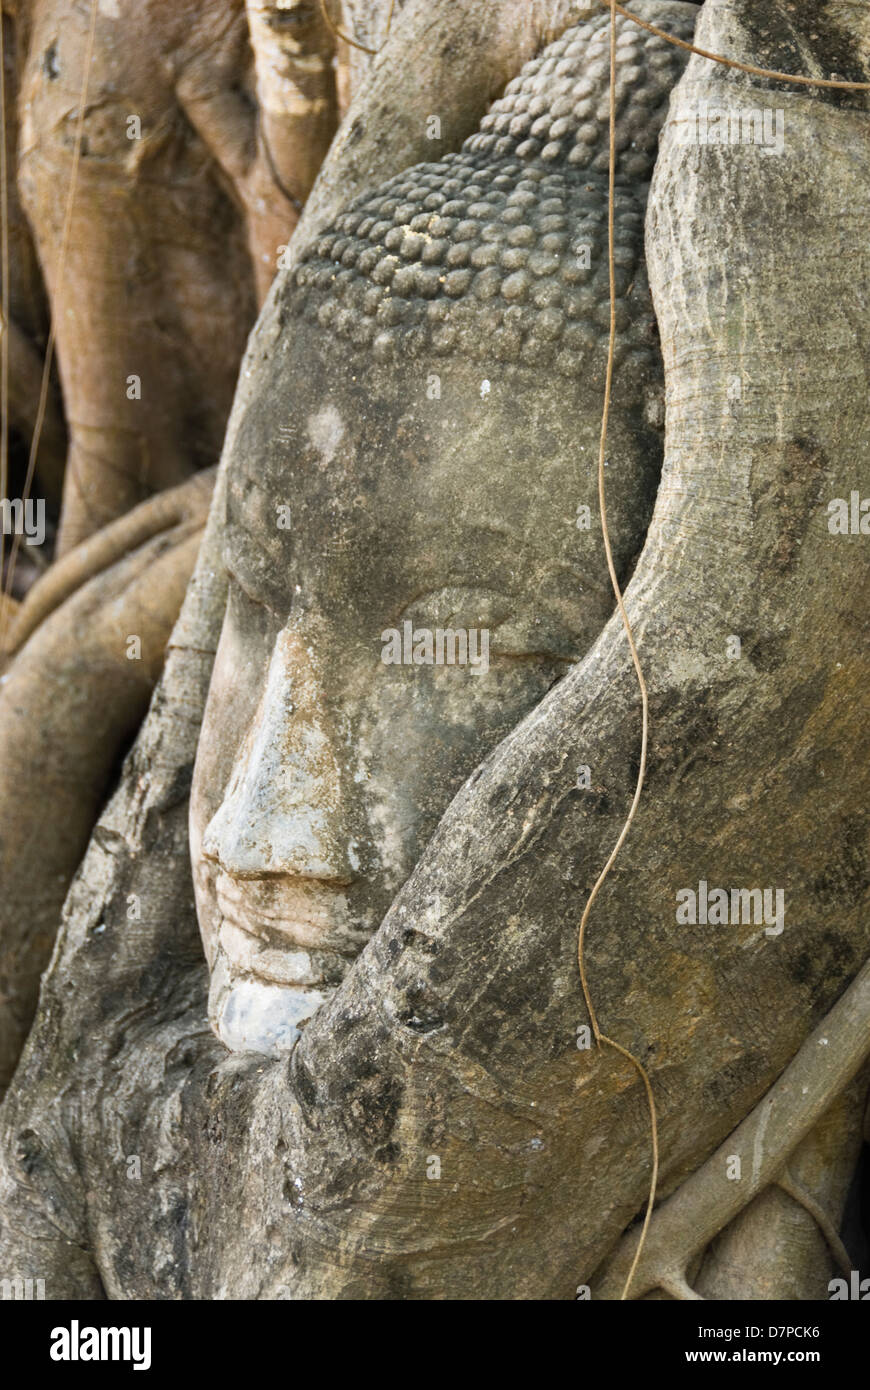 Engrained buddha head entangled in tree roots, Buddha in Baumwurzeln verstrickt Stock Photo